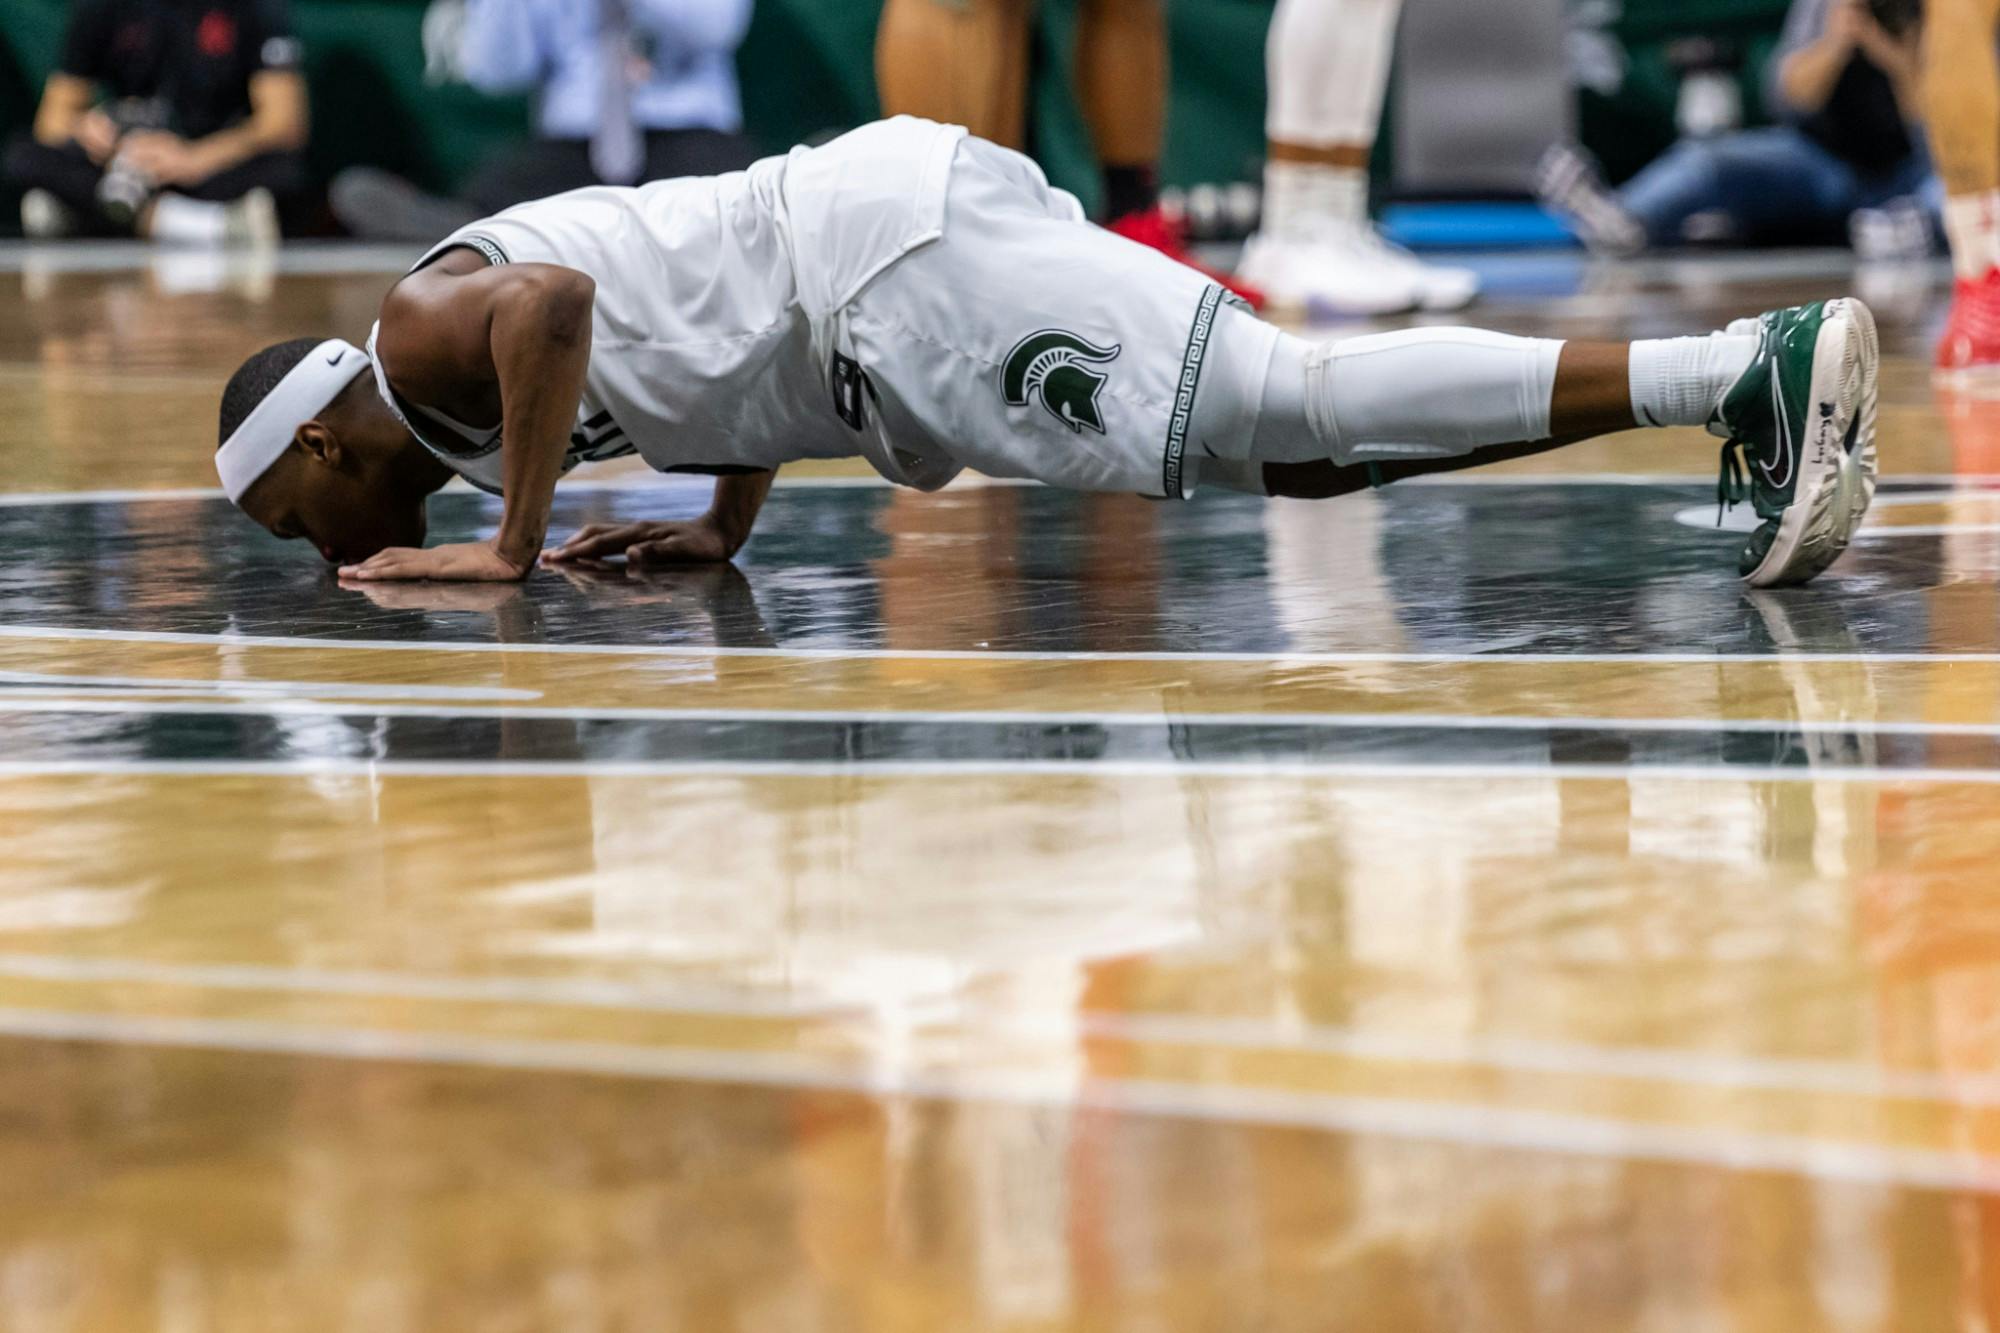 Senior guard Cassius Winston kisses the Spartan head at center court after being subbed out on his senior day. The Spartans defeated the Buckeyes, 80-69, at the Breslin Student Events Center on March 8, 2020. 